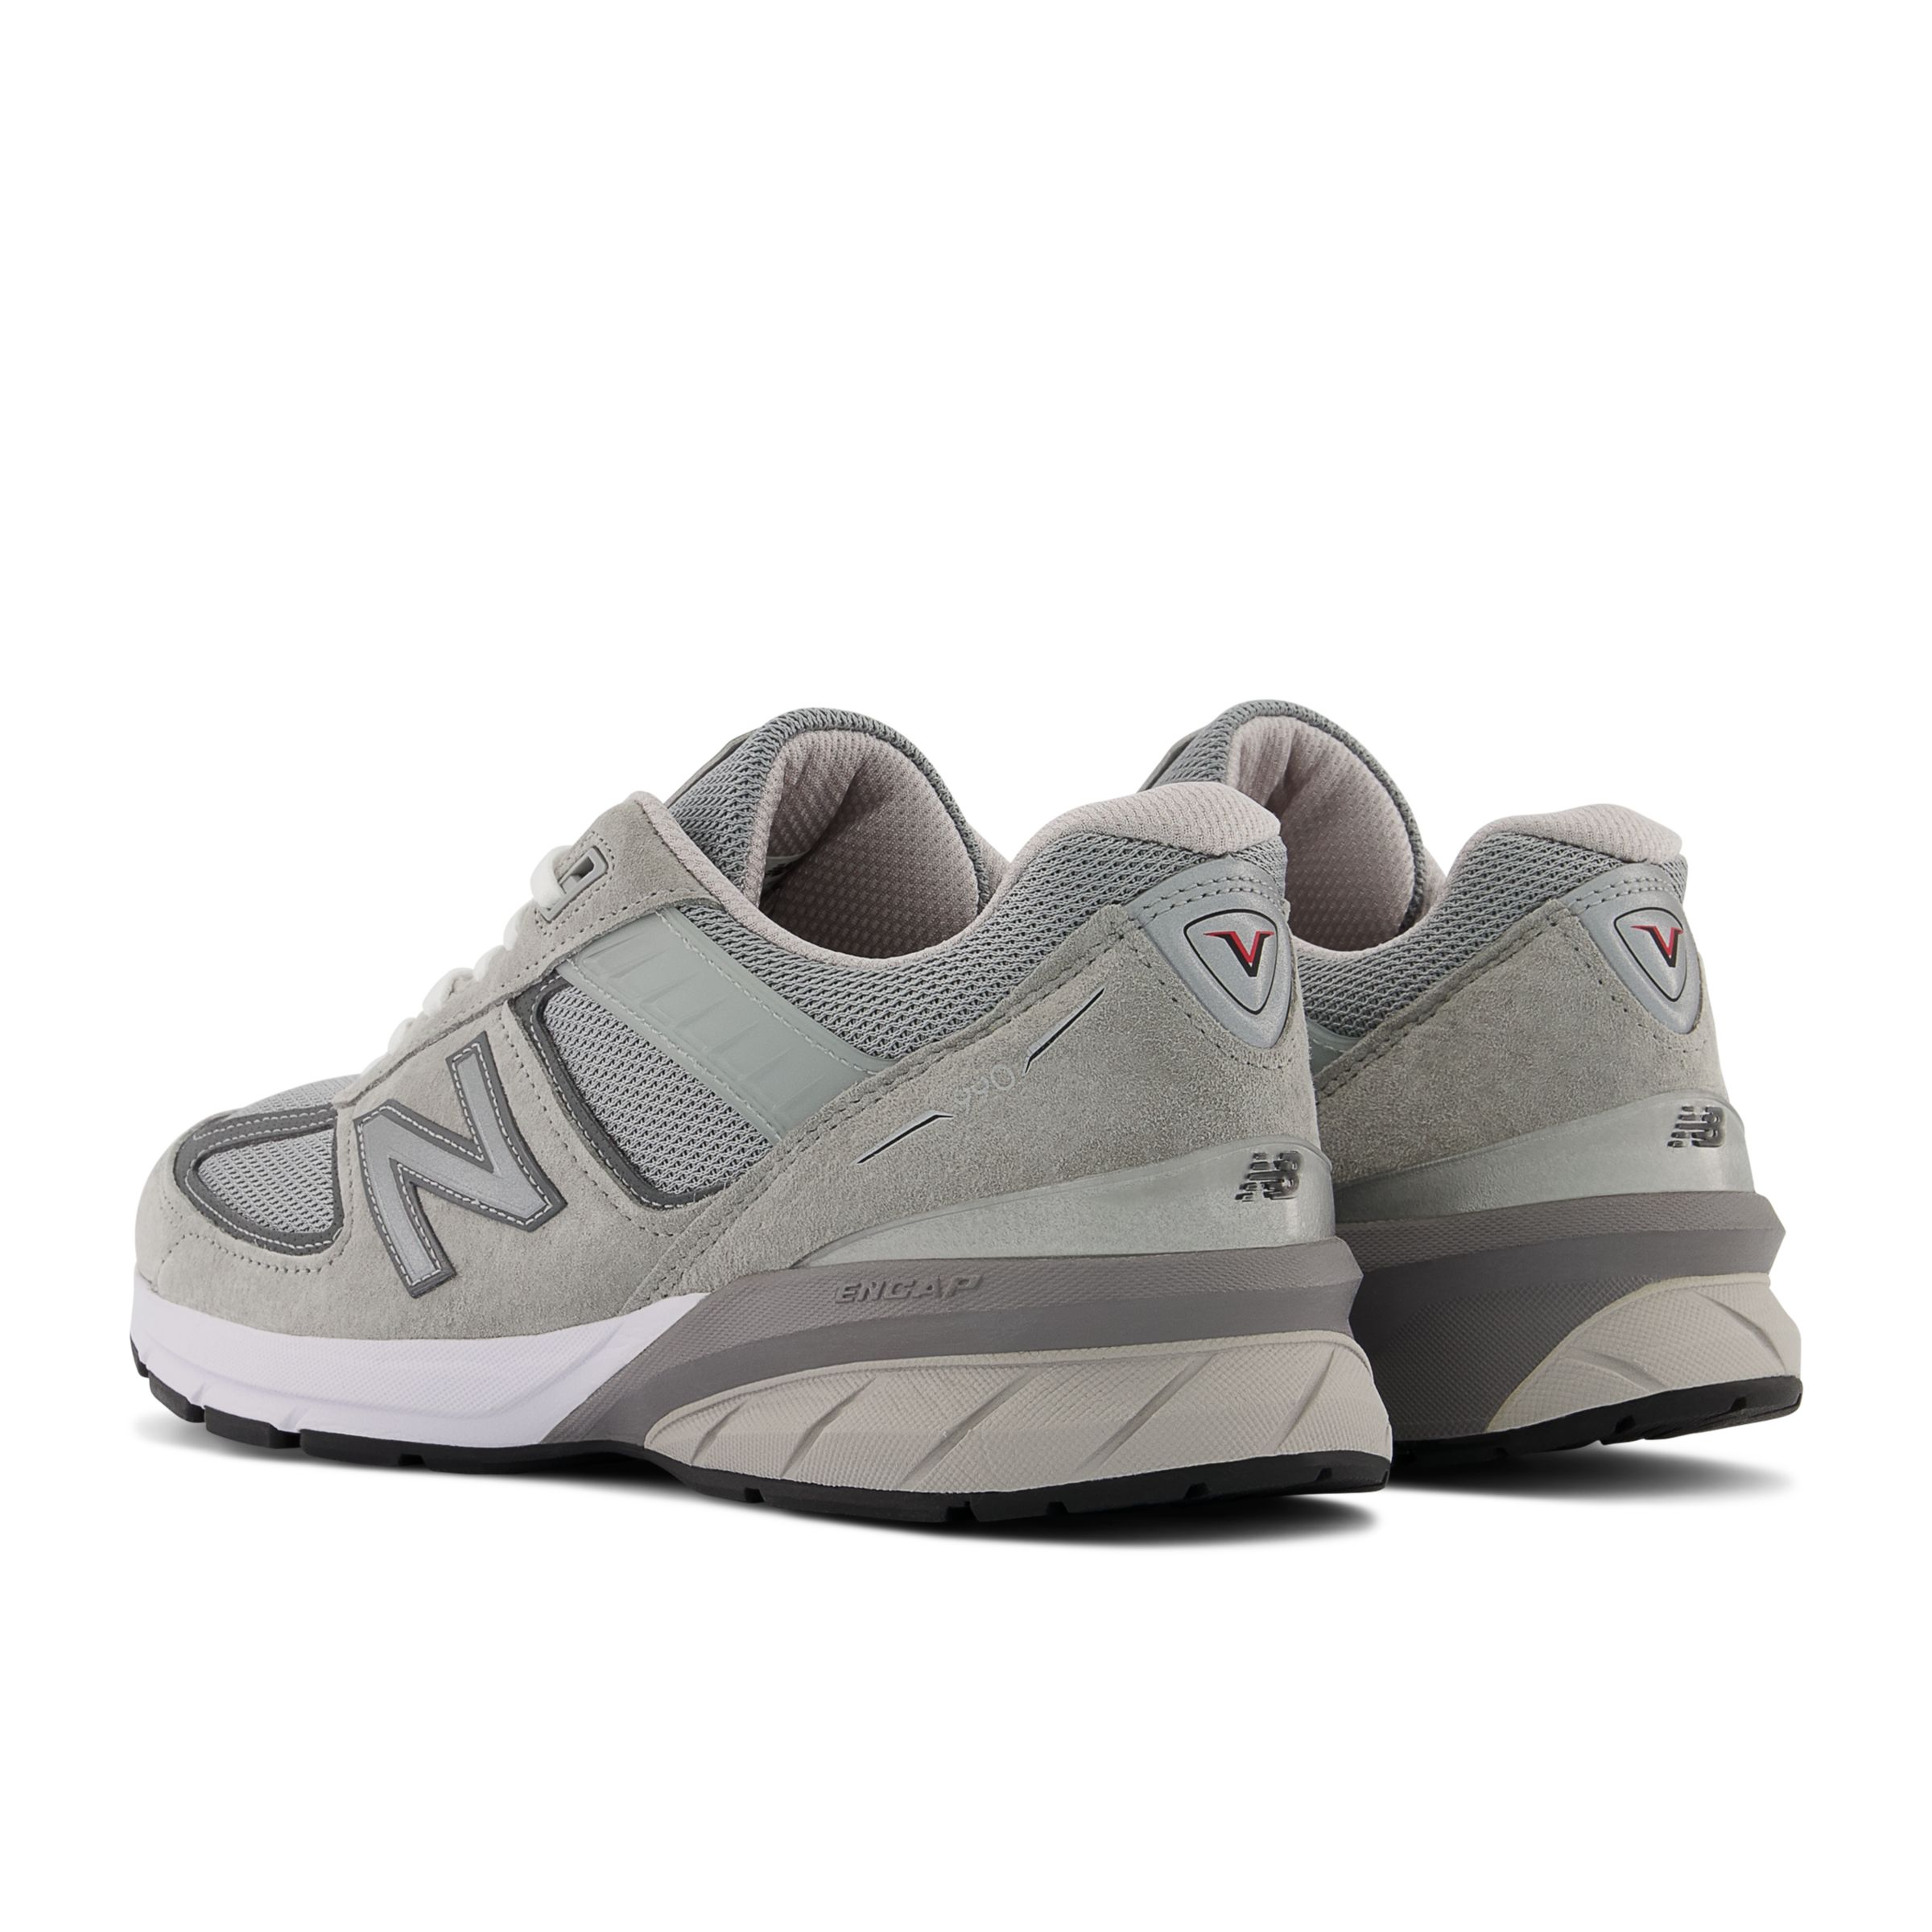 Made in US 990v5 - New Balance